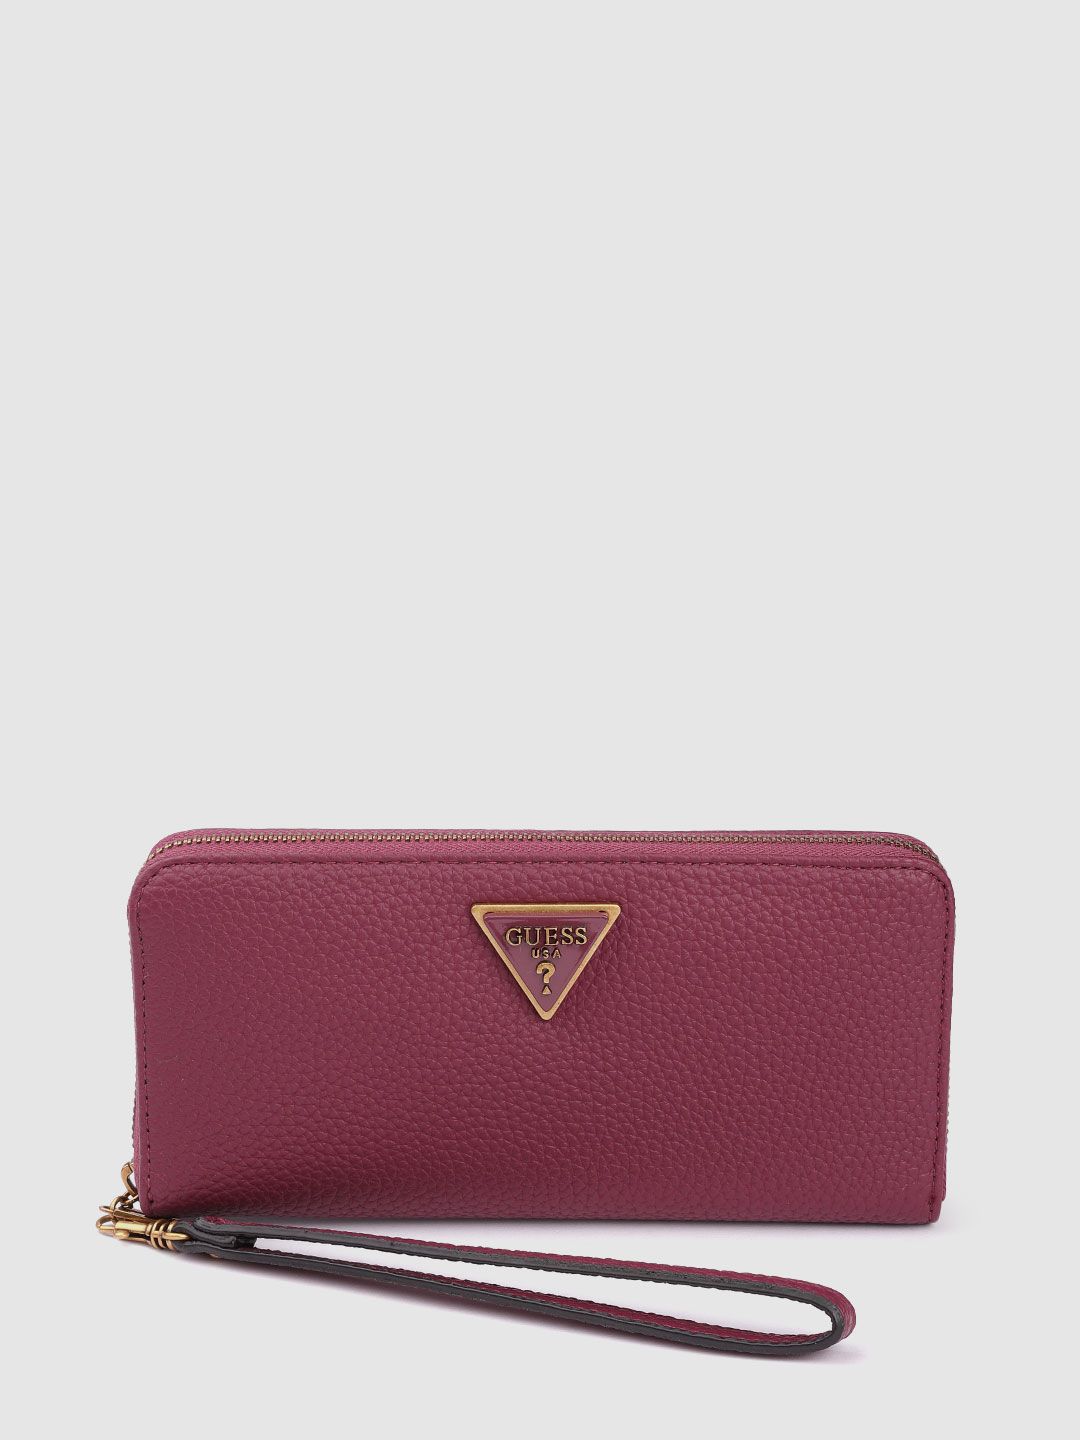 GUESS Women Magenta Solid Downtown Chic Zip Around Wallet Price in India